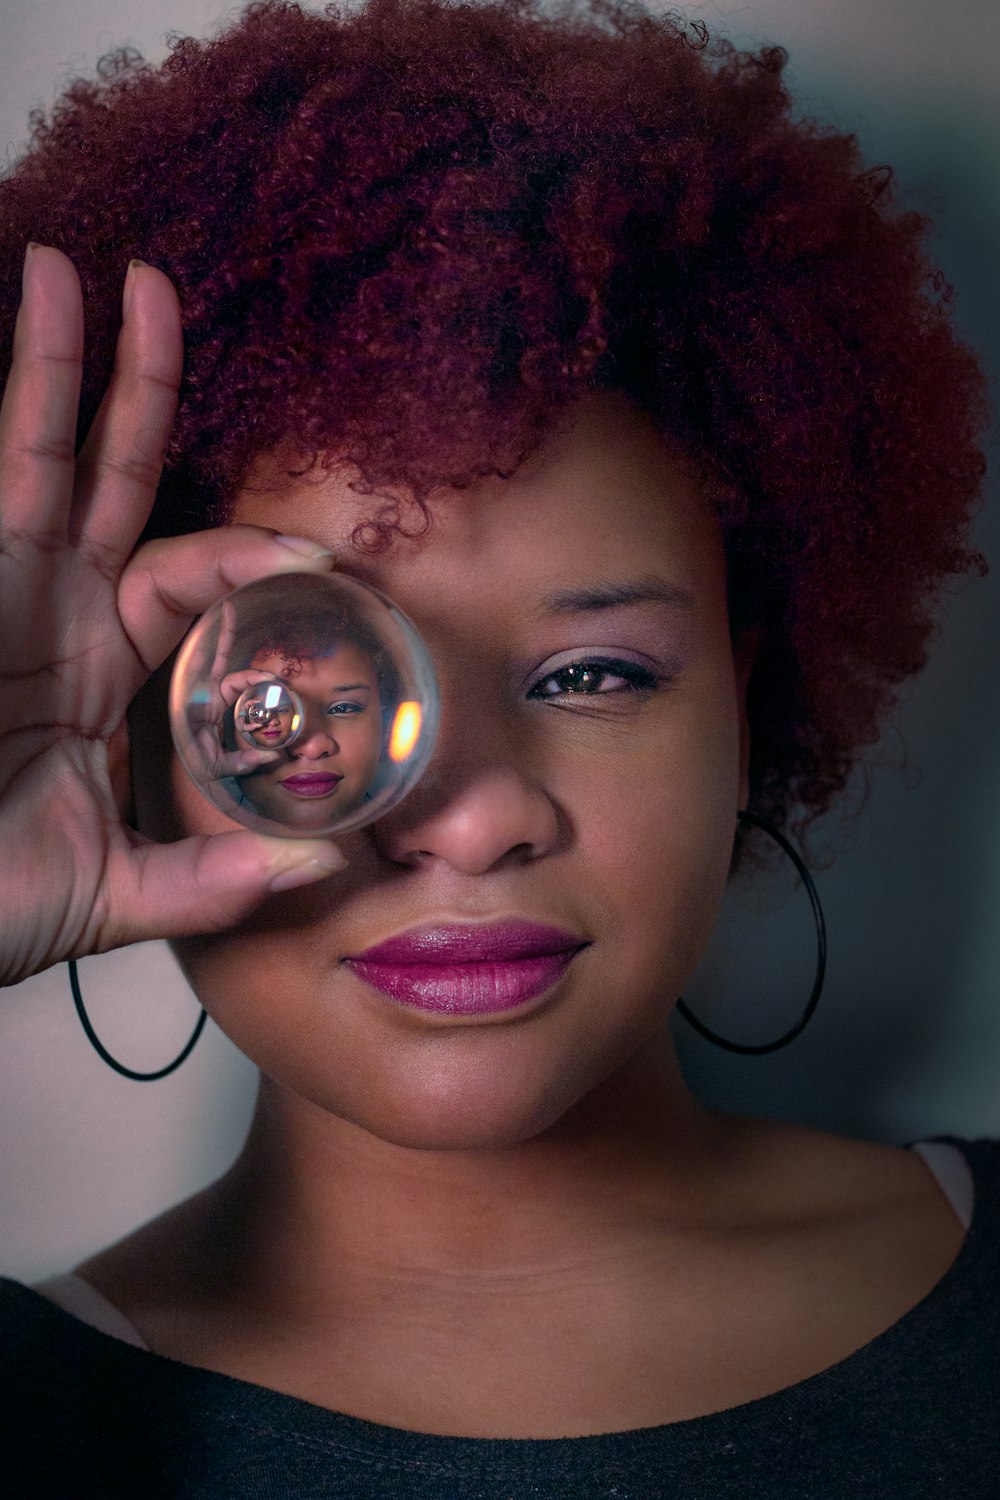 woman holding covering right eye with clear glass ball